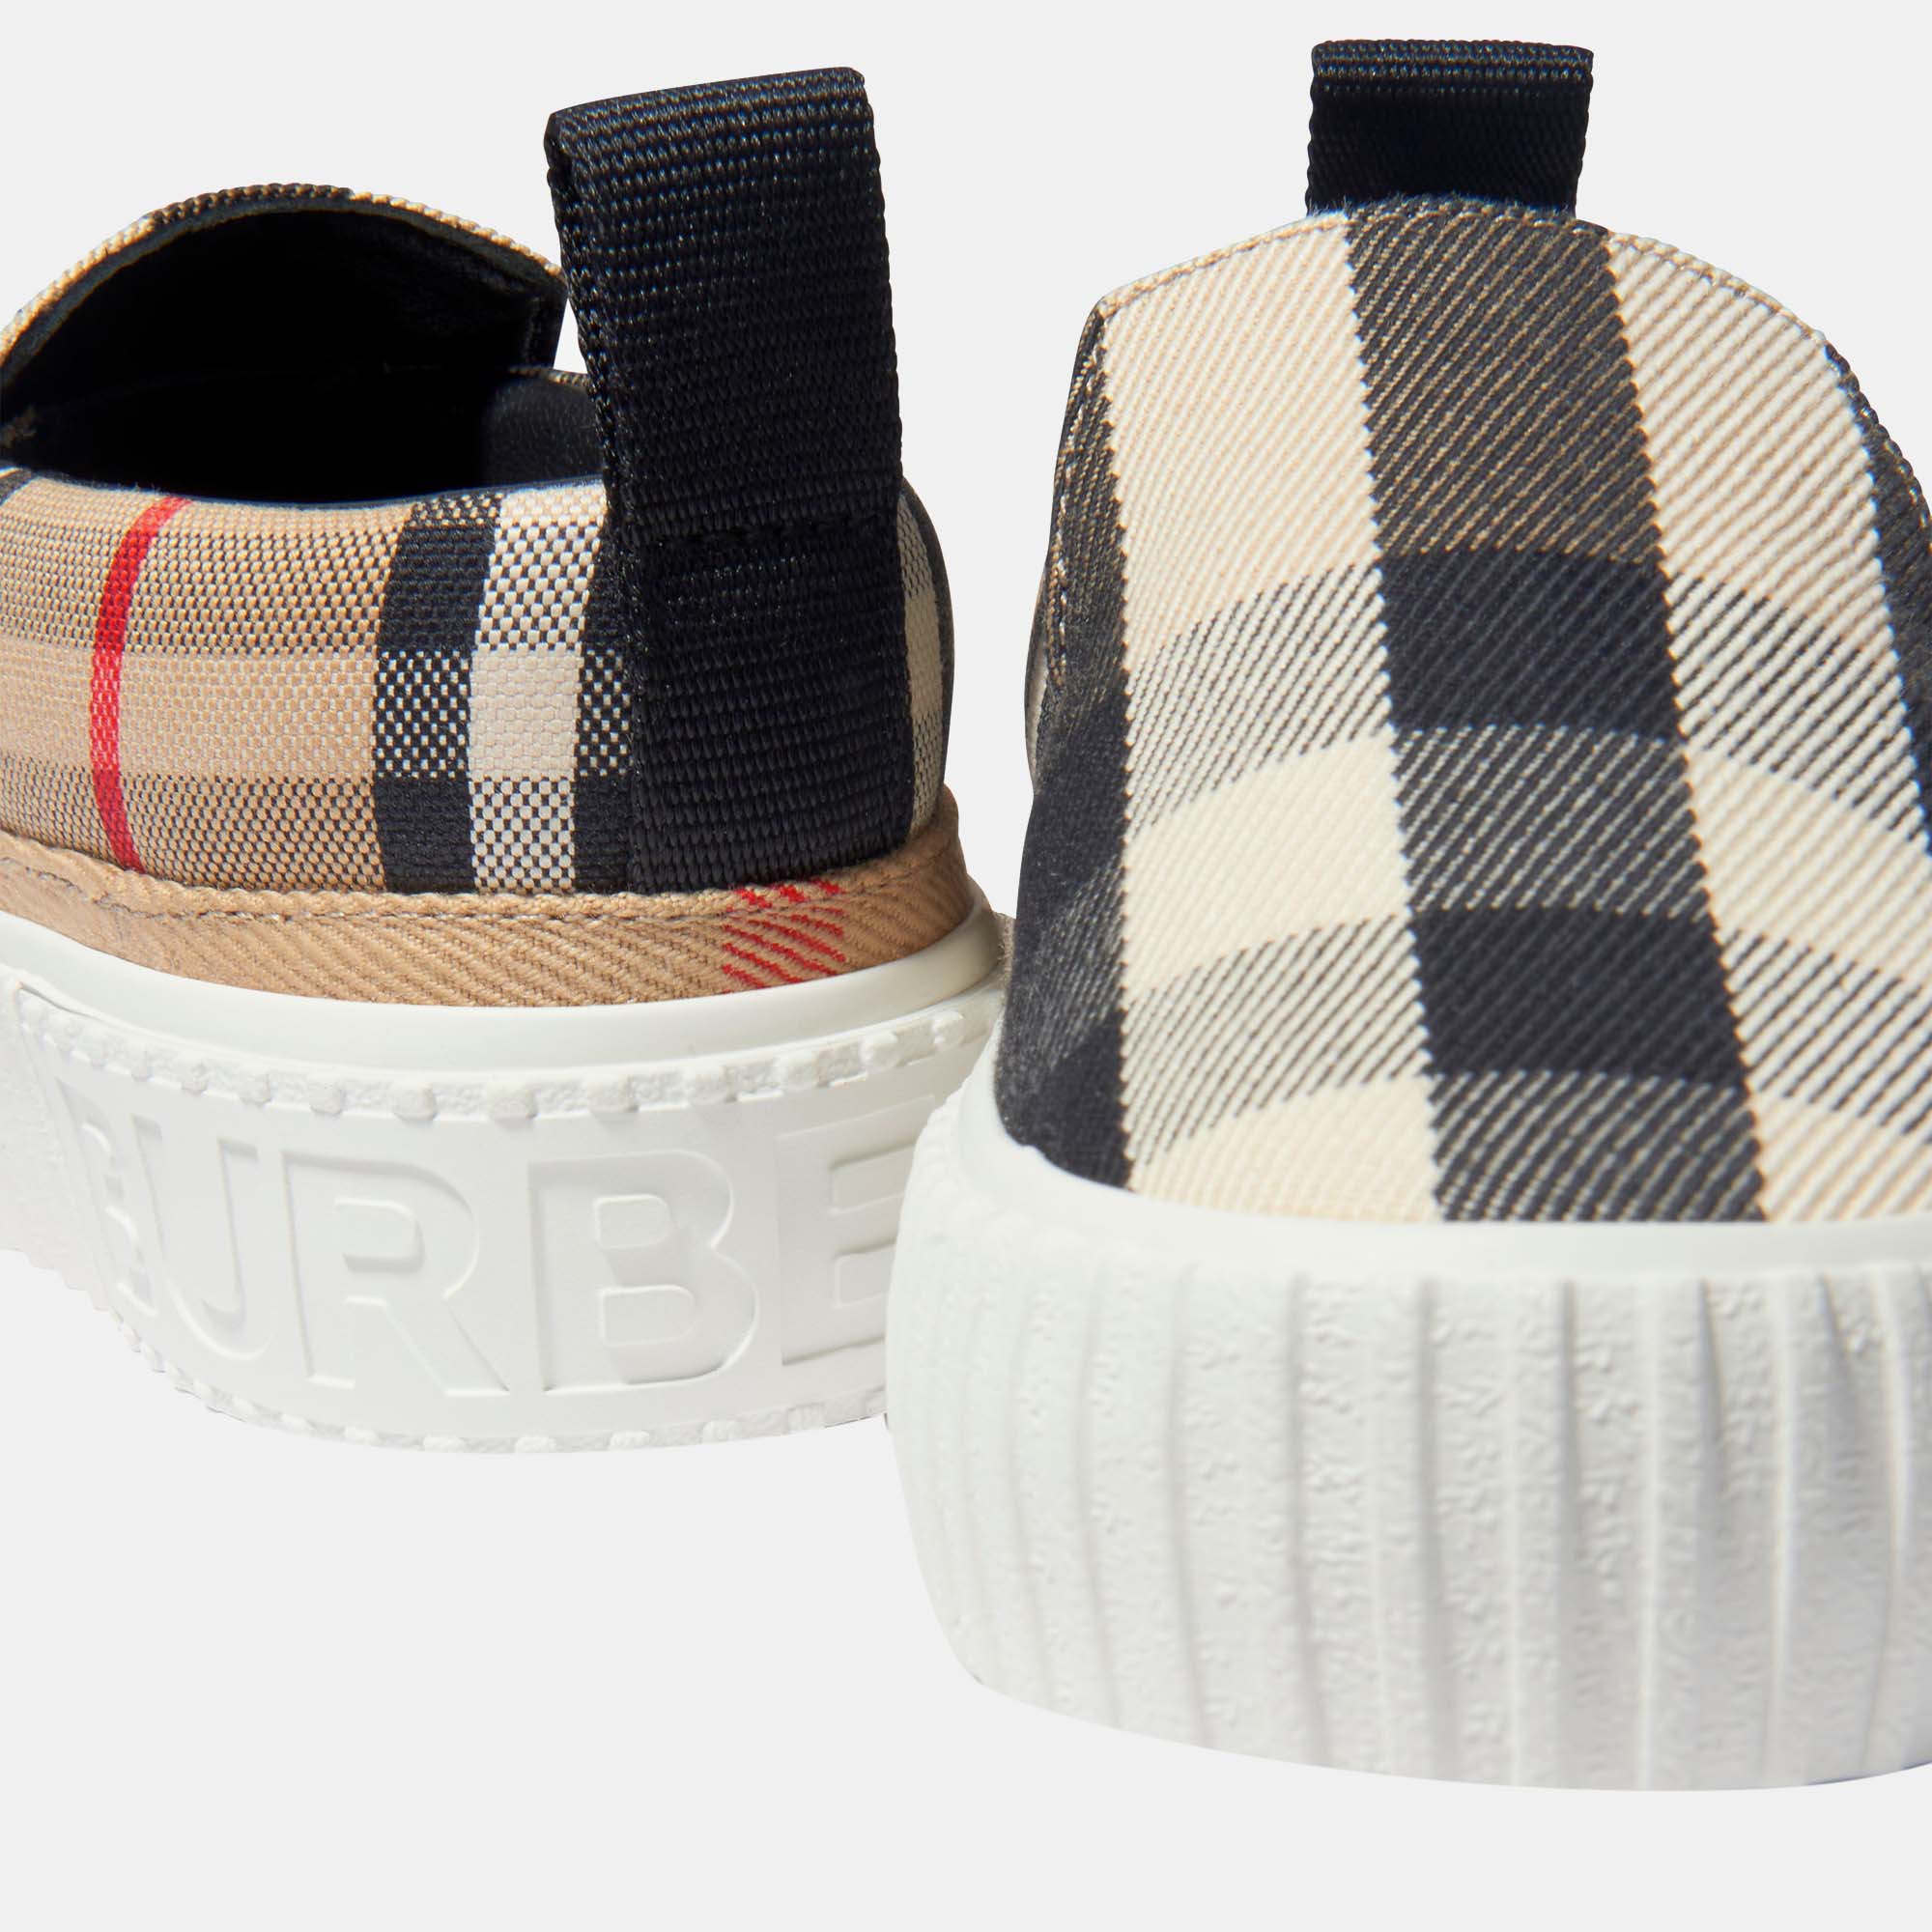 Buberry (Kids) Beige Multicolor - Cotton - Check-pattern Andrew's Slip-on Sneakers EU 24